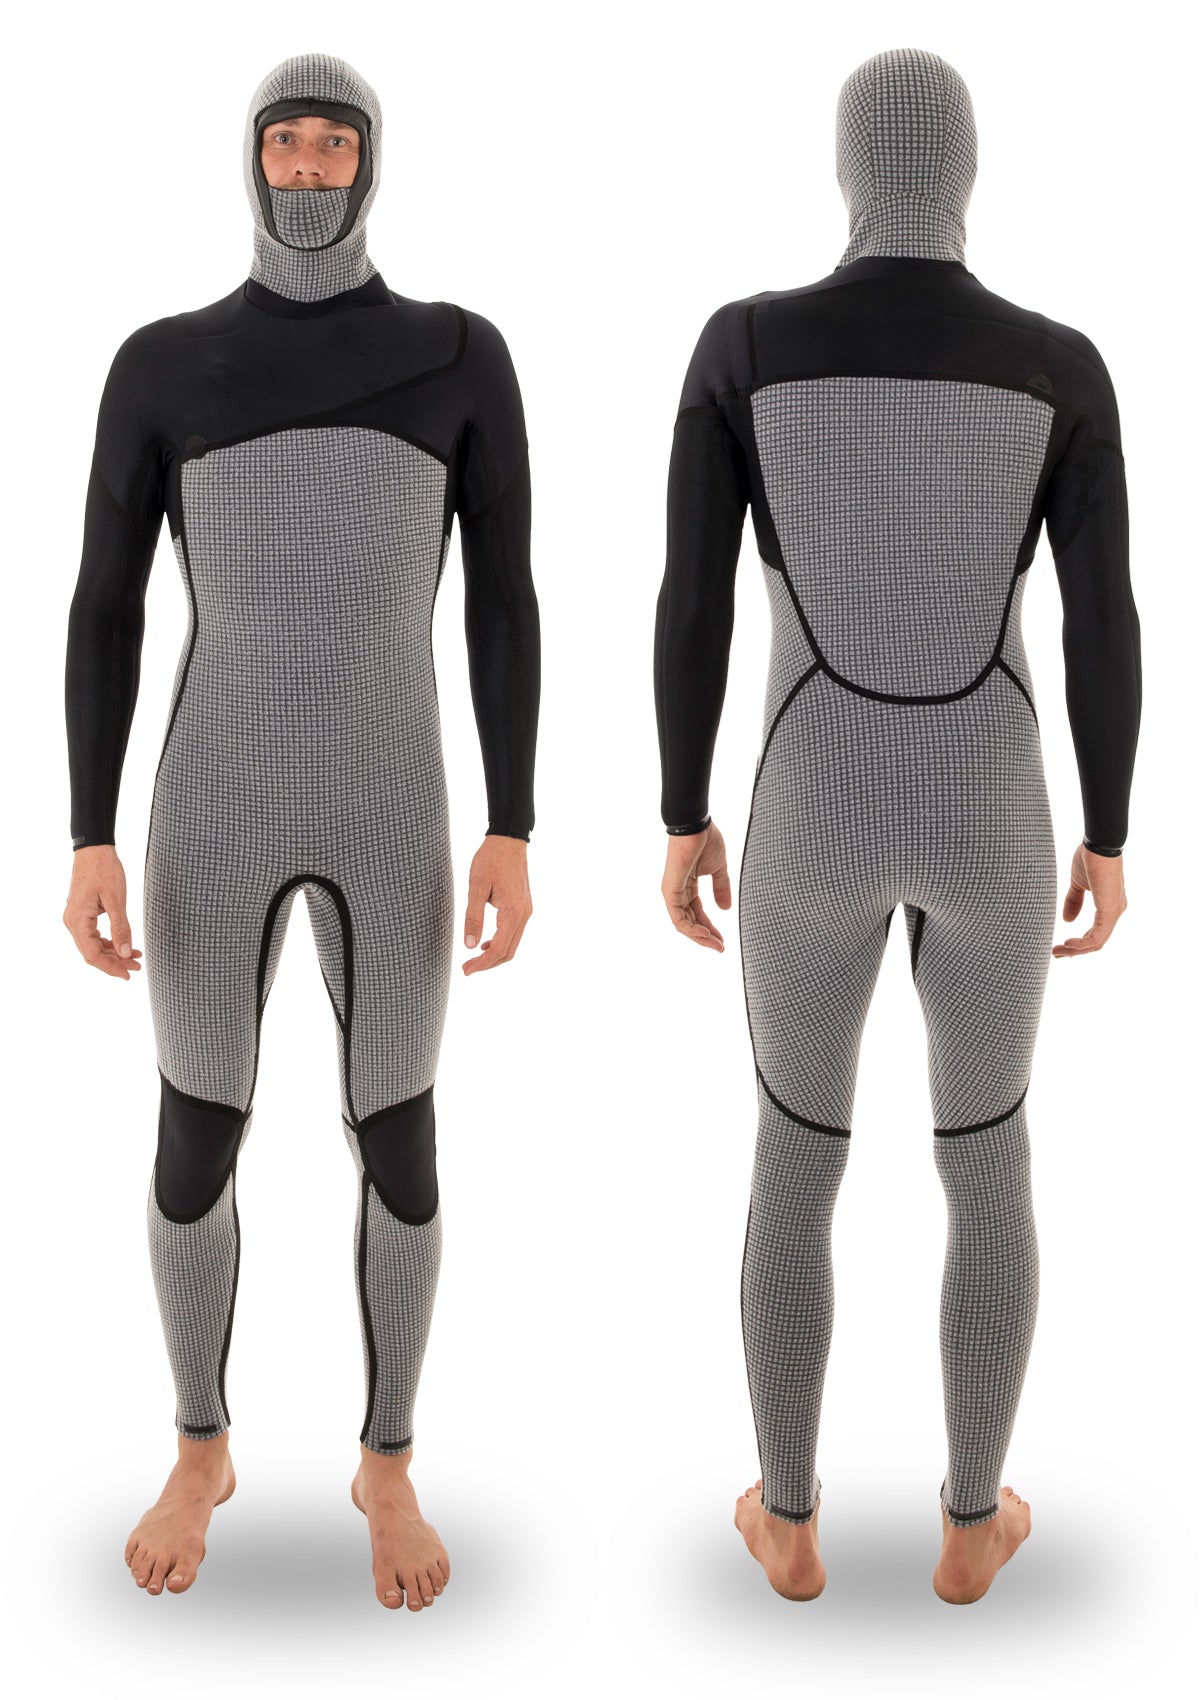 needessentials 4/3 hooded liquid taped thermal wetsuit torren martyn surfing winter non branded